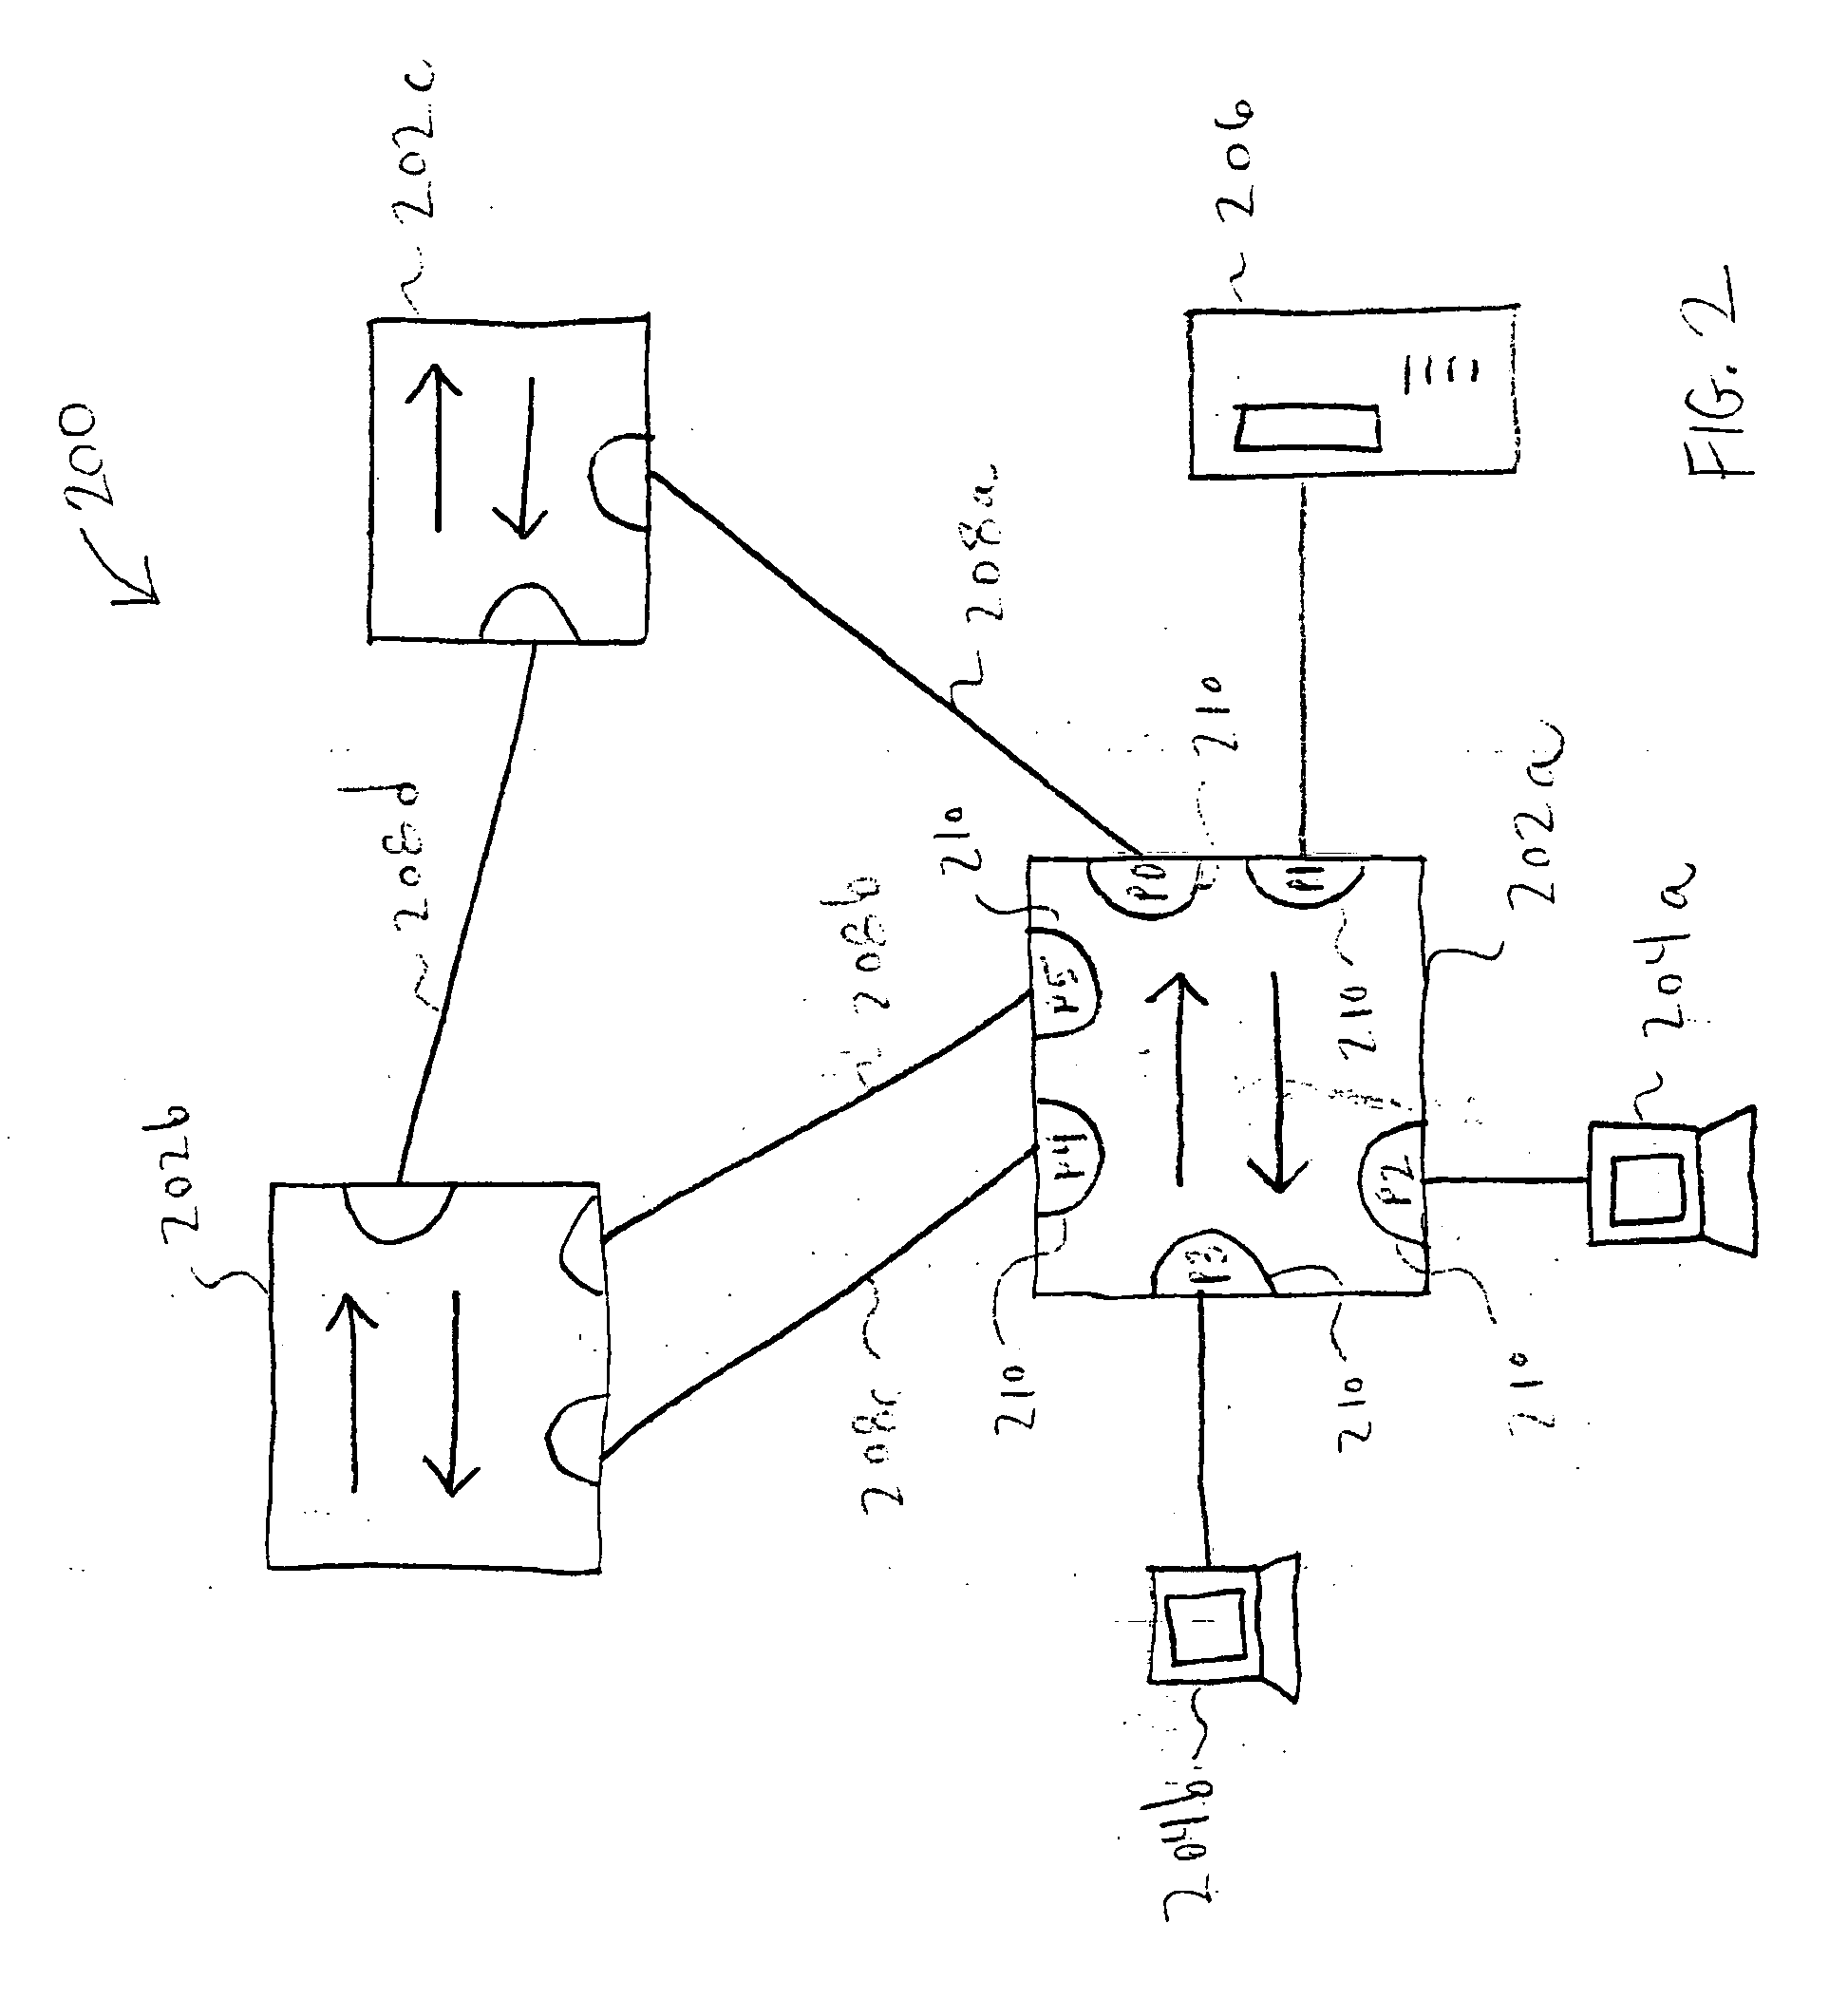 System and method for running a multiple spanning tree protocol with a very large number of domains